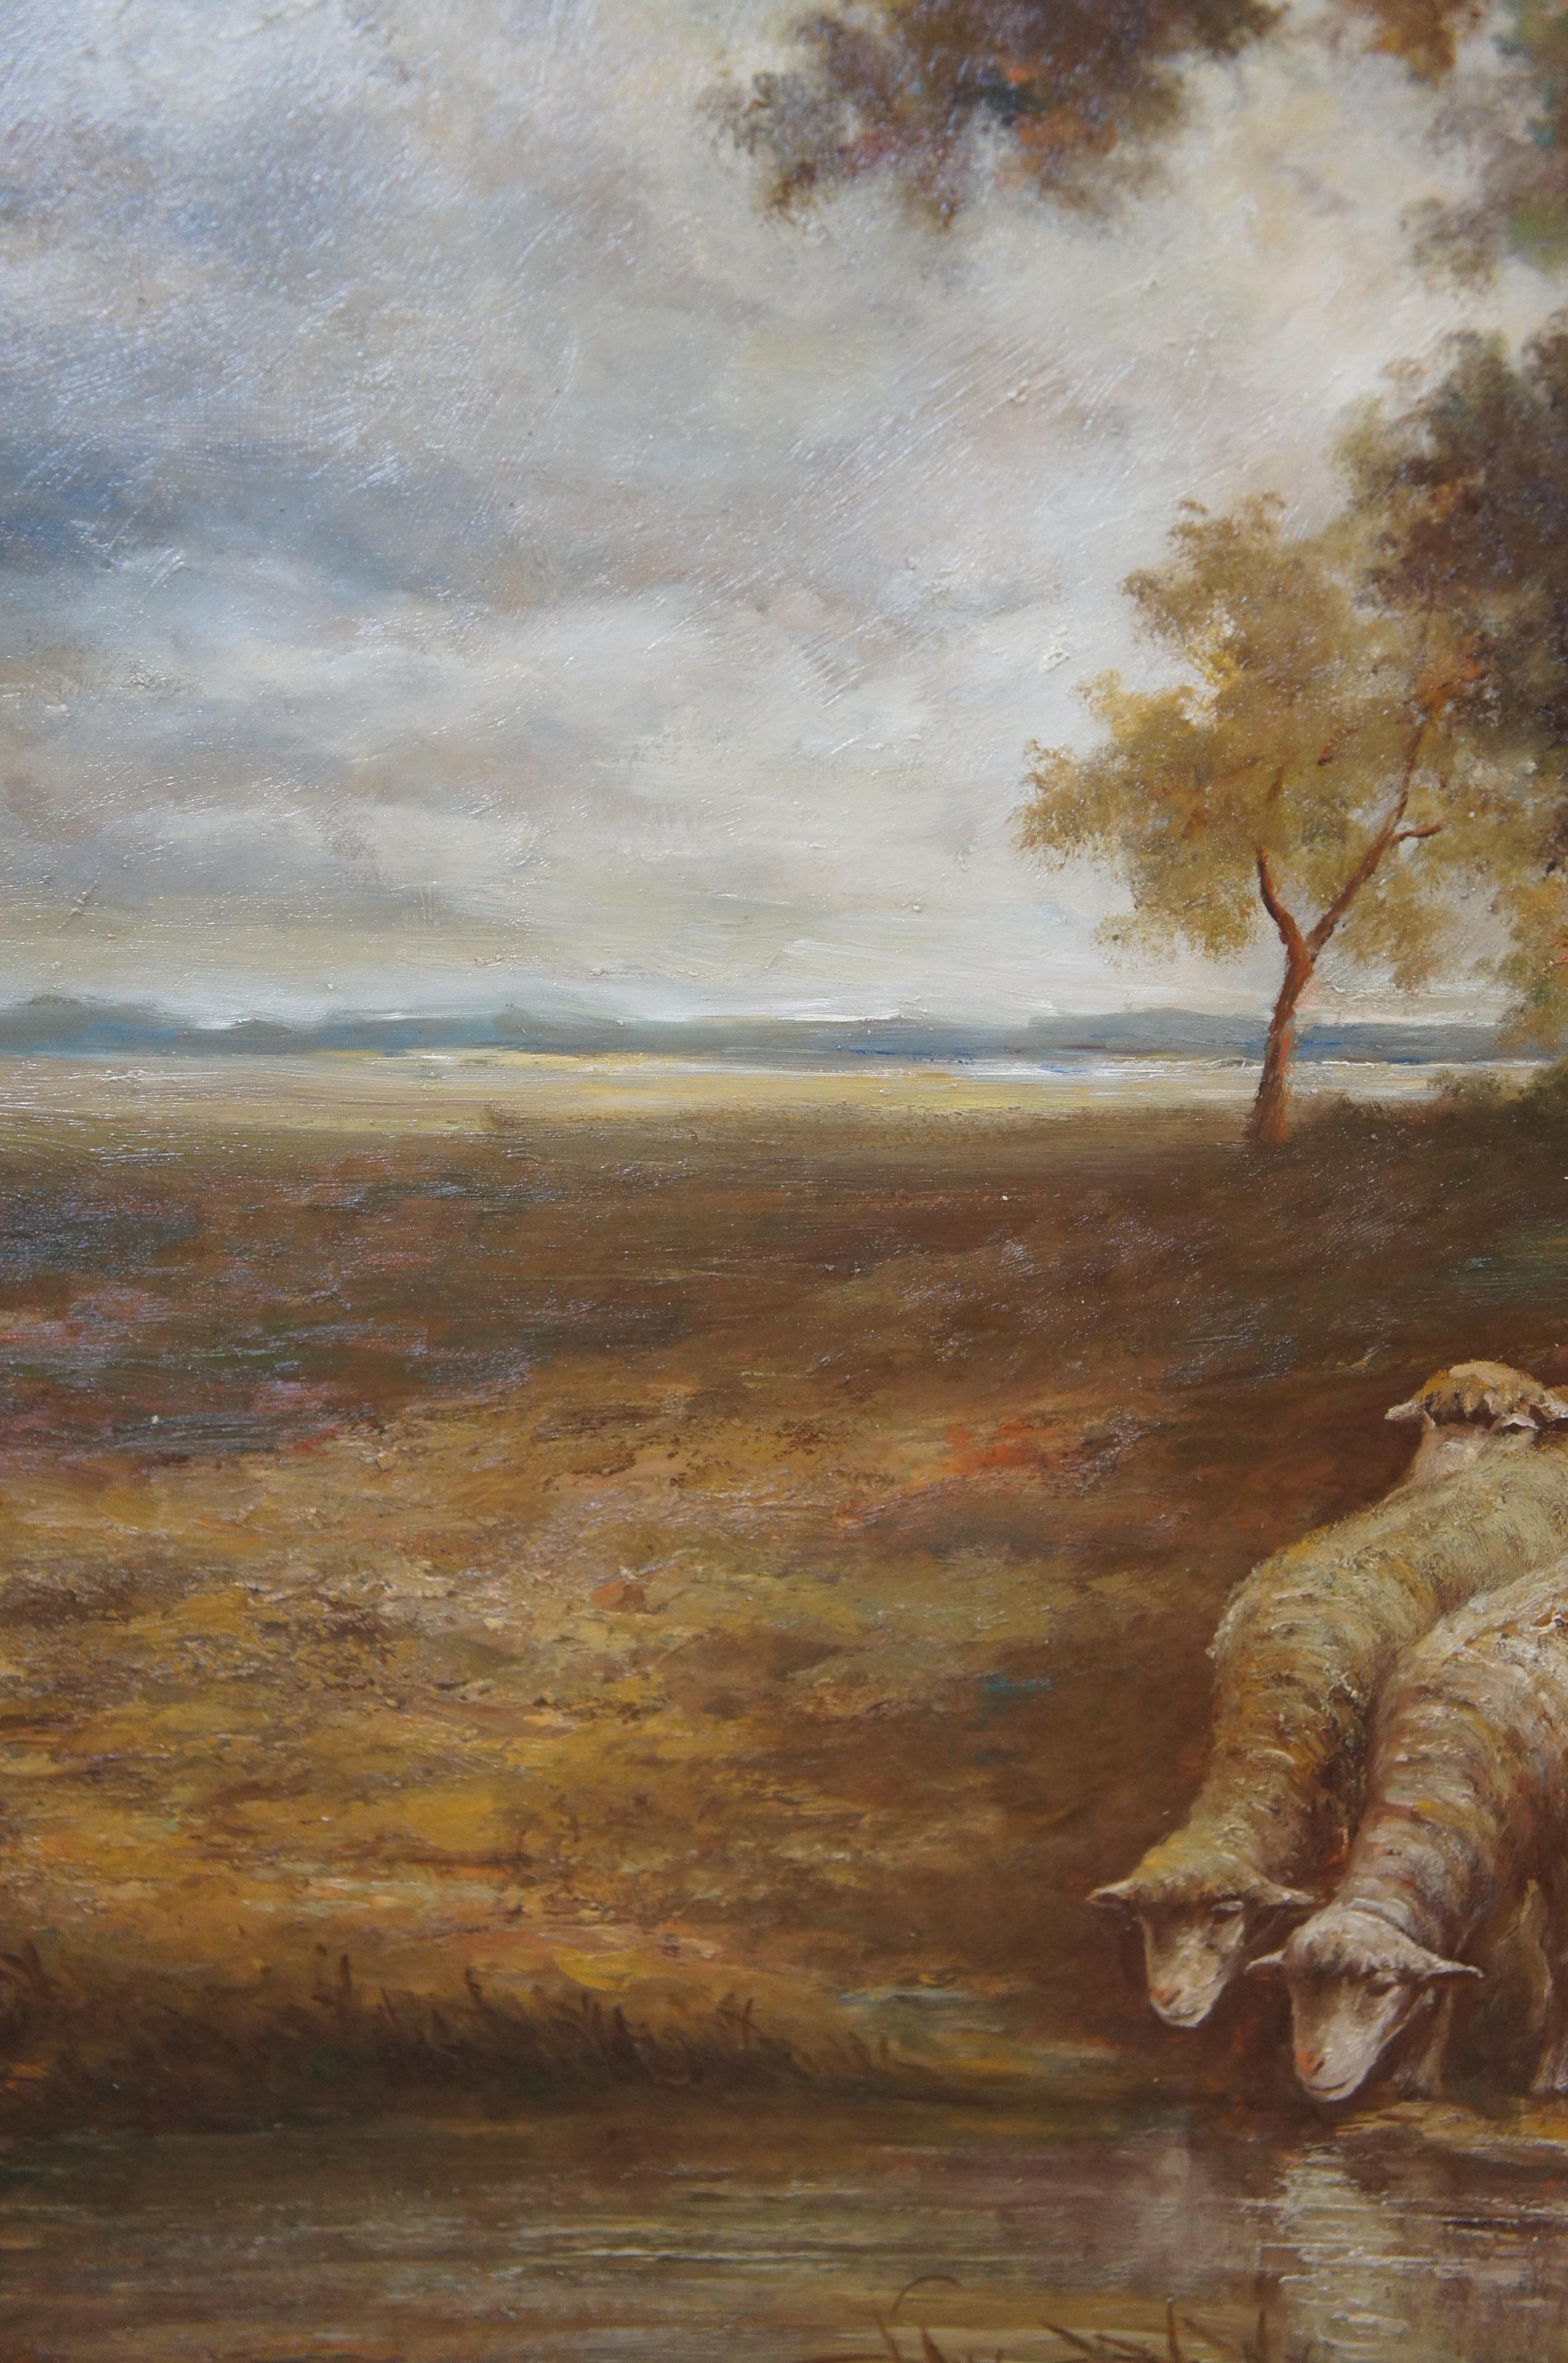 Assteyn Sheep Grazing Countryside Landscape Oil Painting on Canvas 49